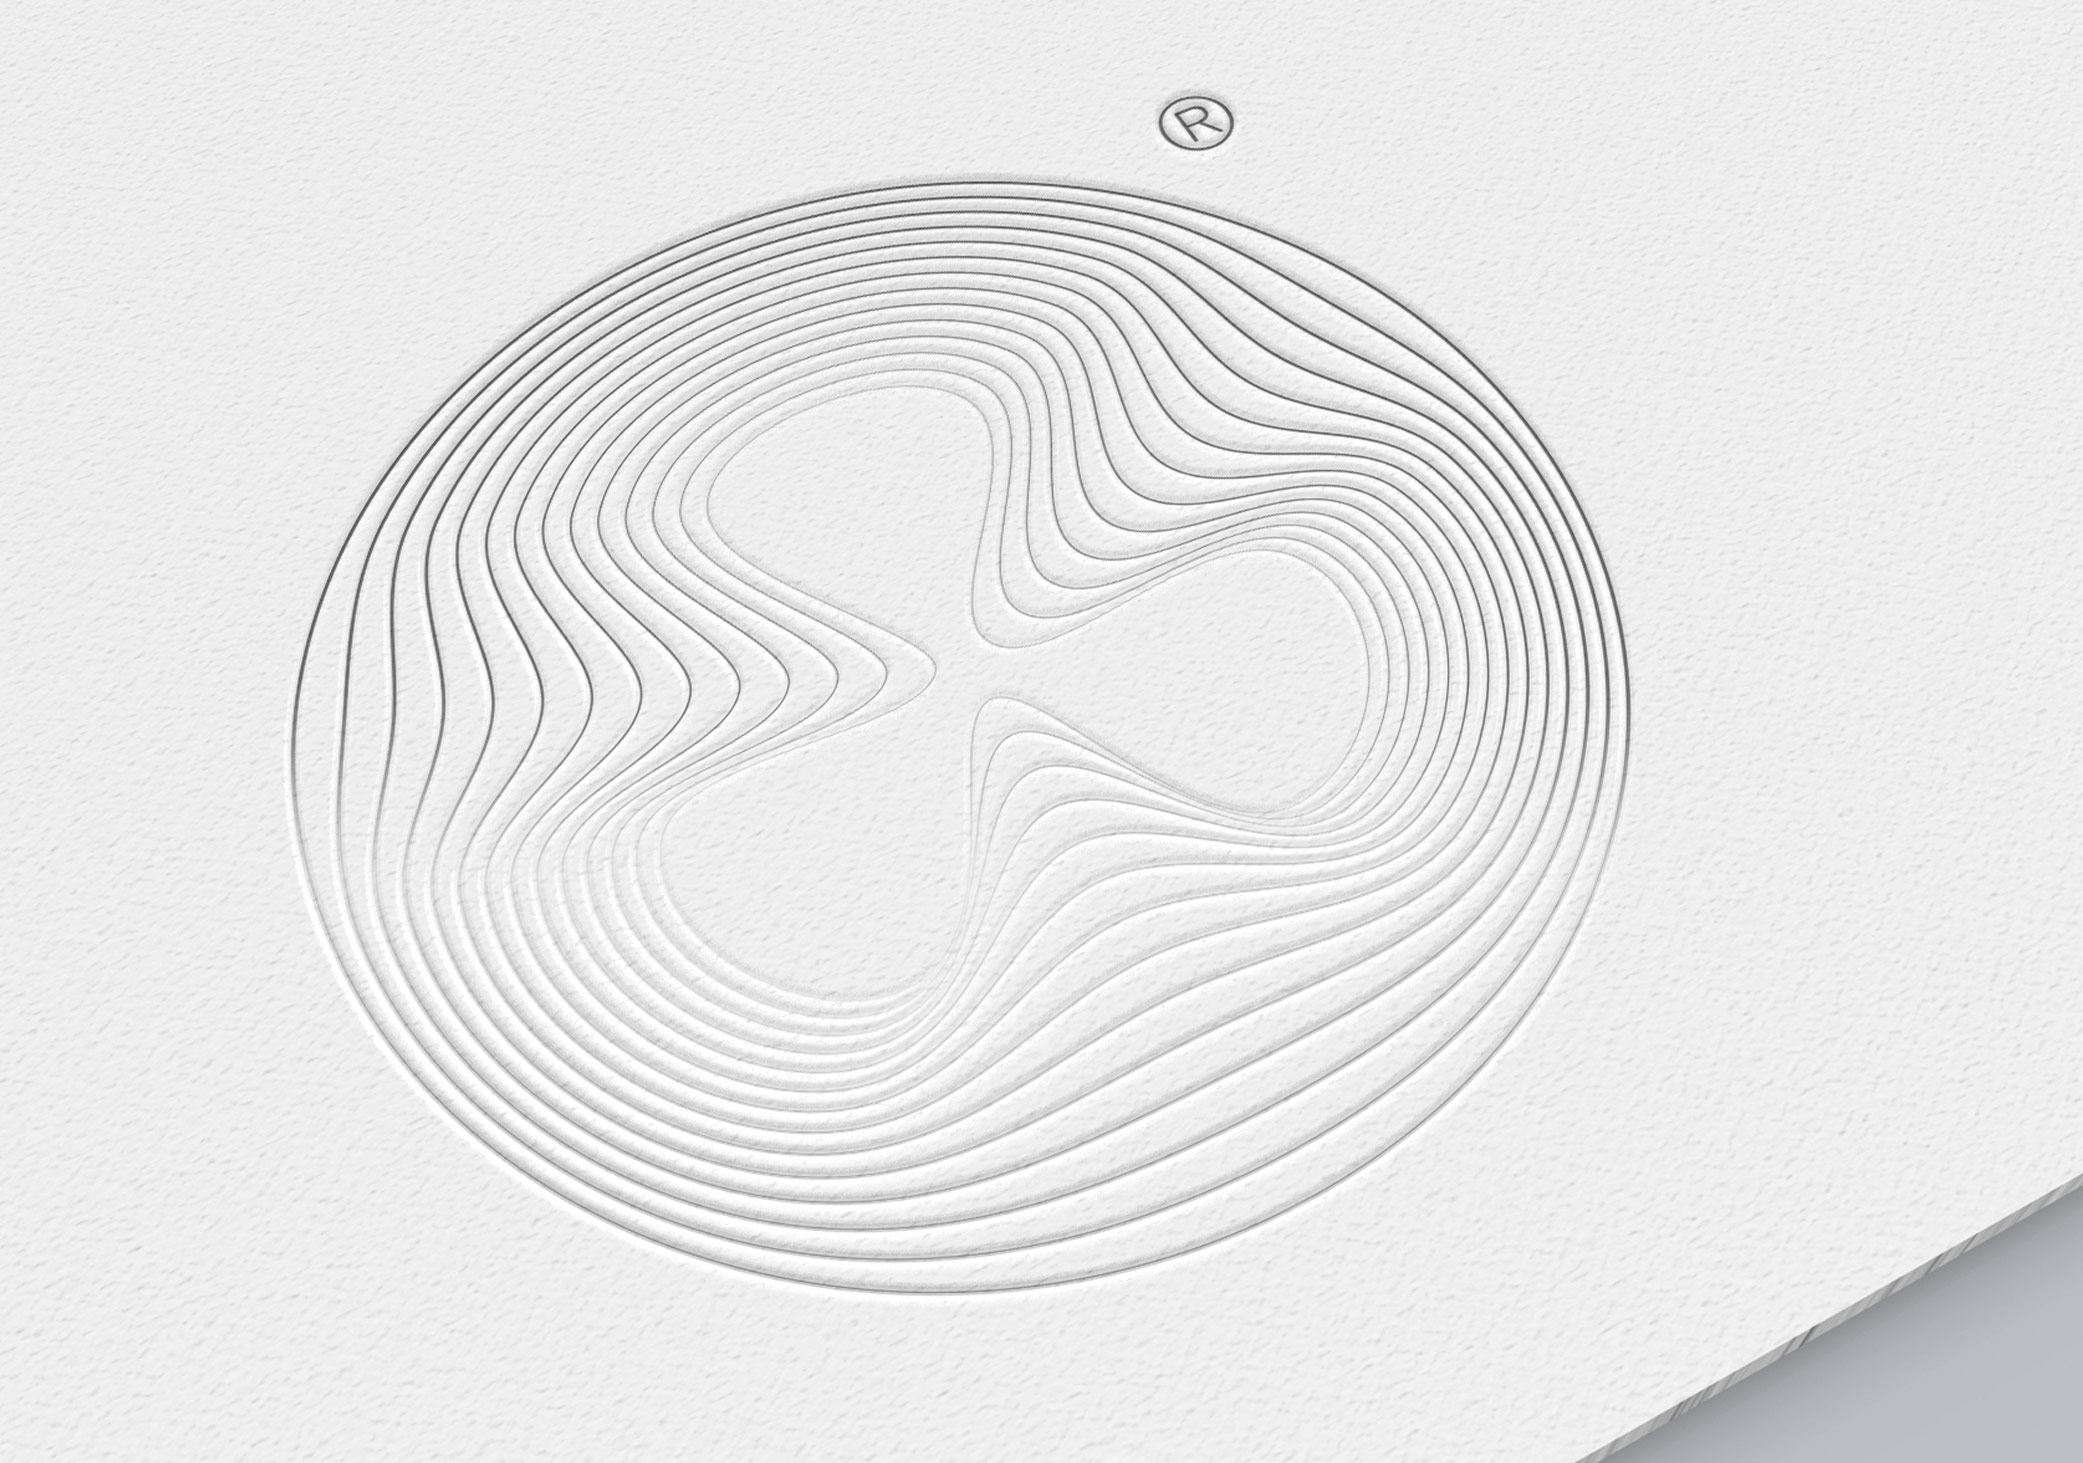 Experimental logo design using a warped circle shown as an embossed print